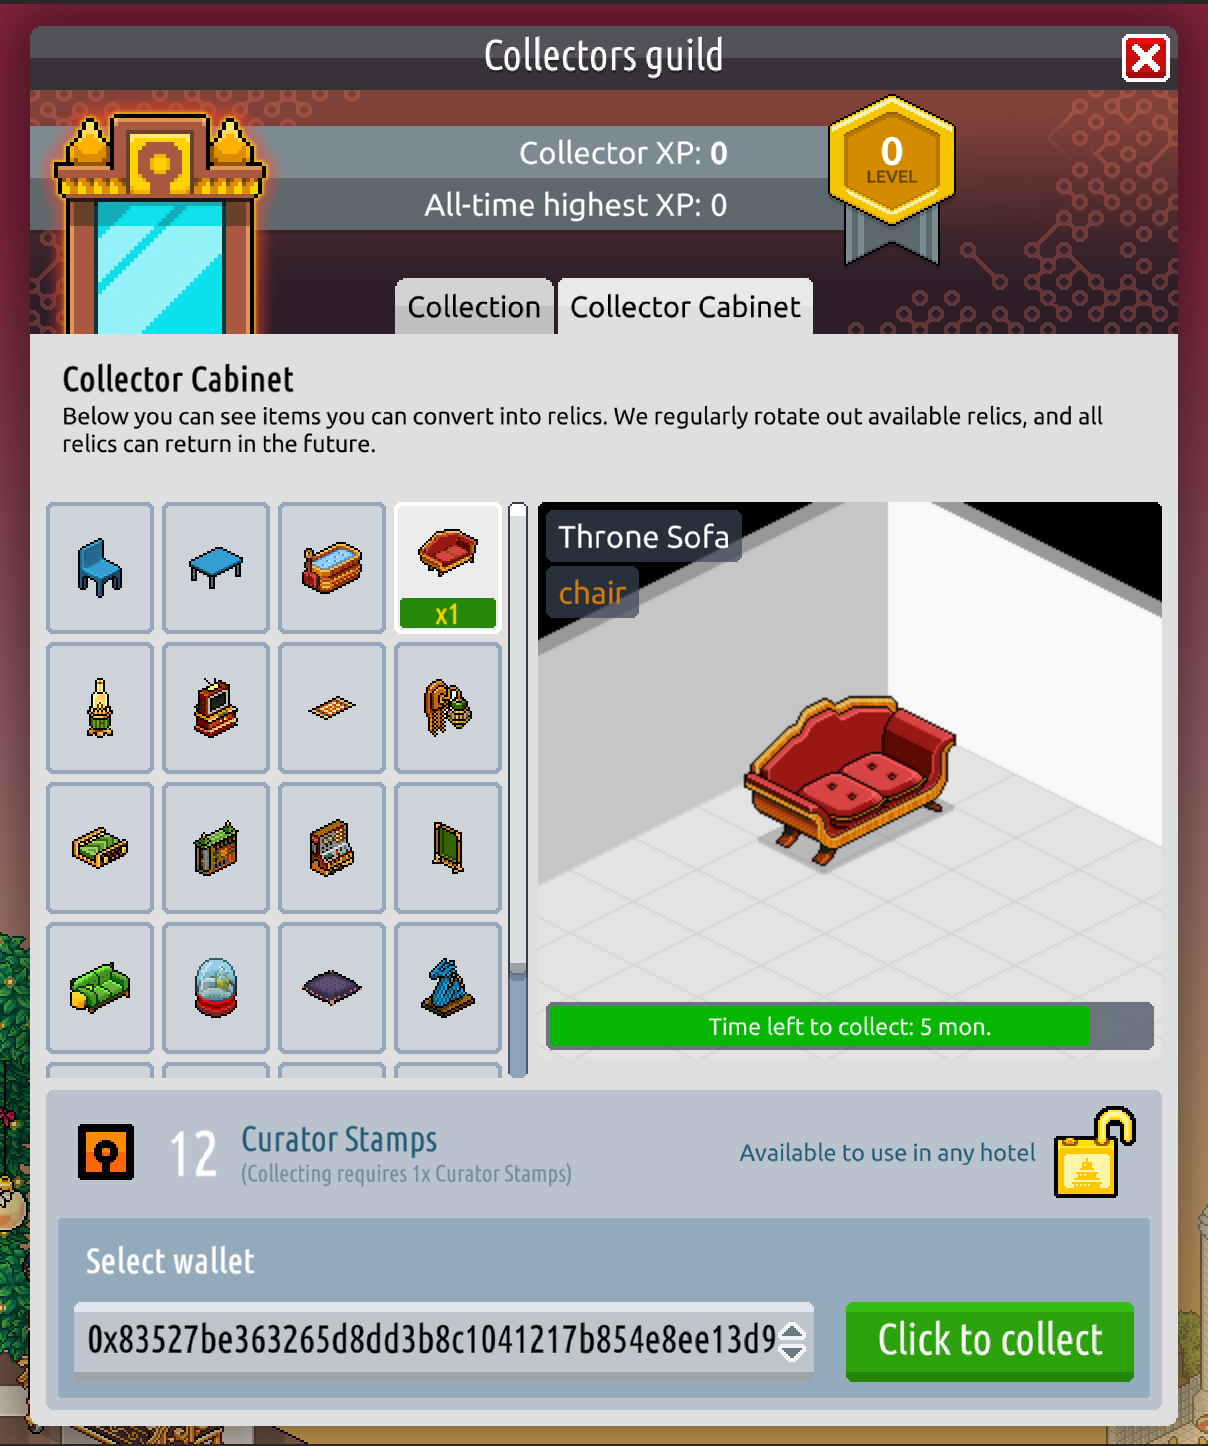 Our web3 leap: Habbo Collectibles and the Collectors Guild - Habbo